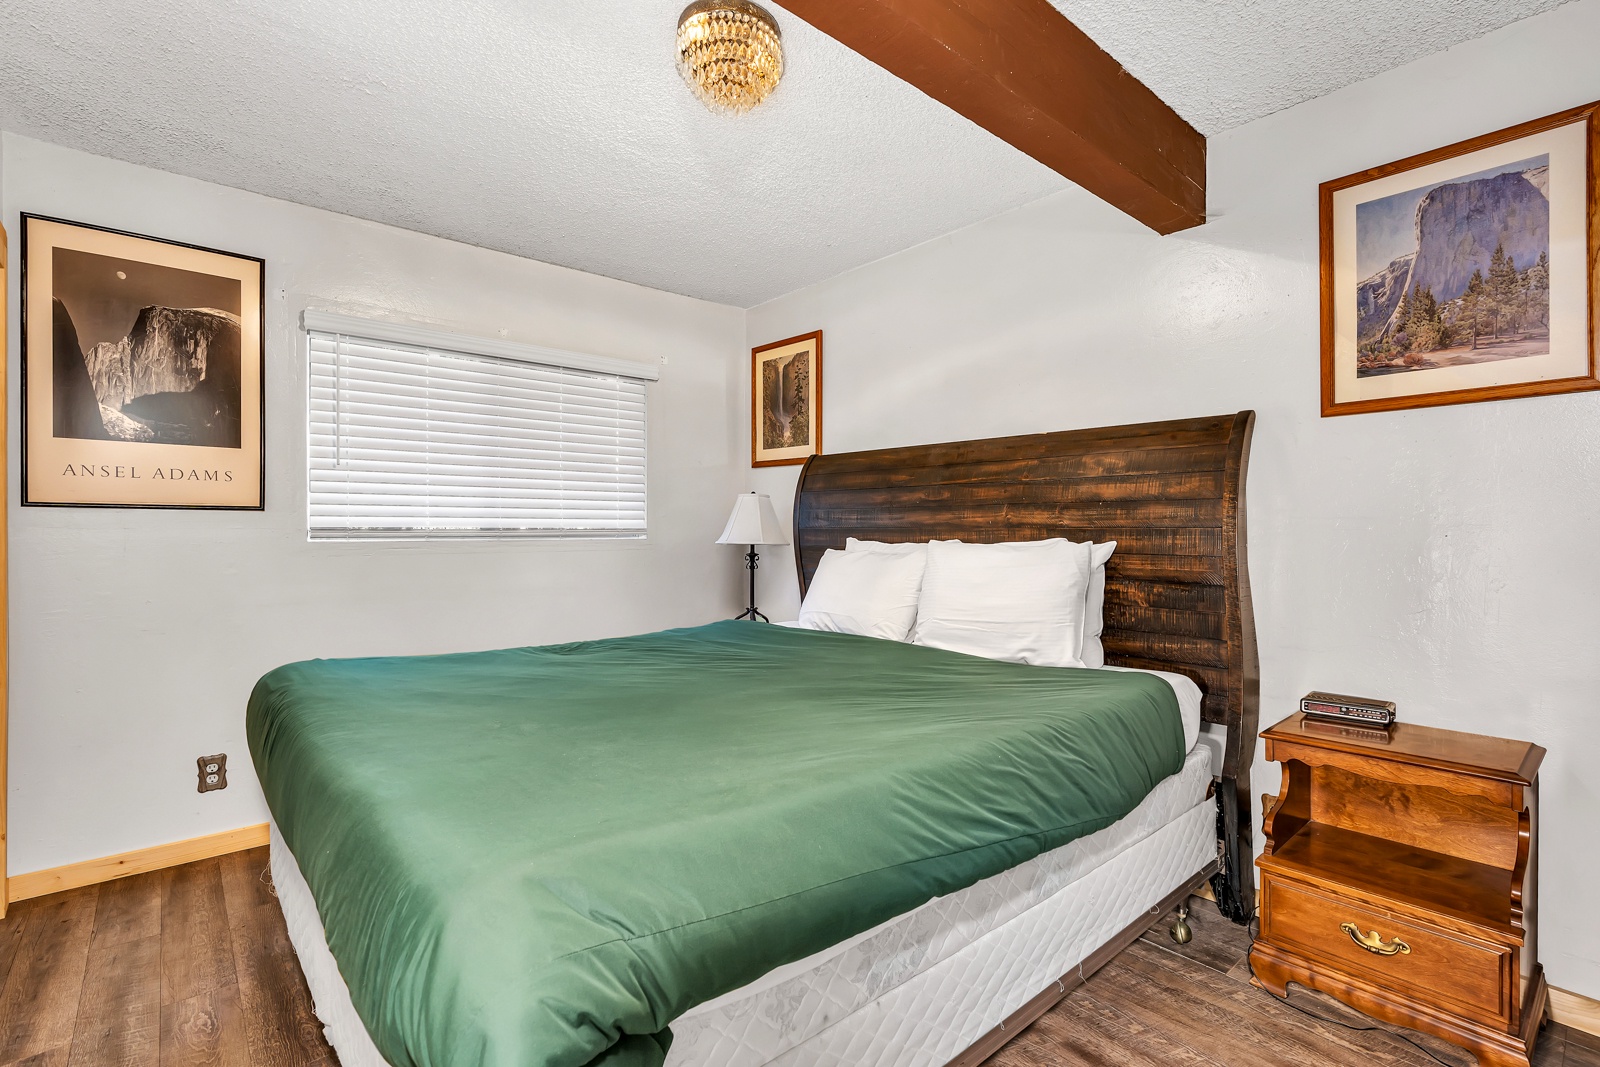 The first of three spacious bedrooms offers a plush king-sized bed